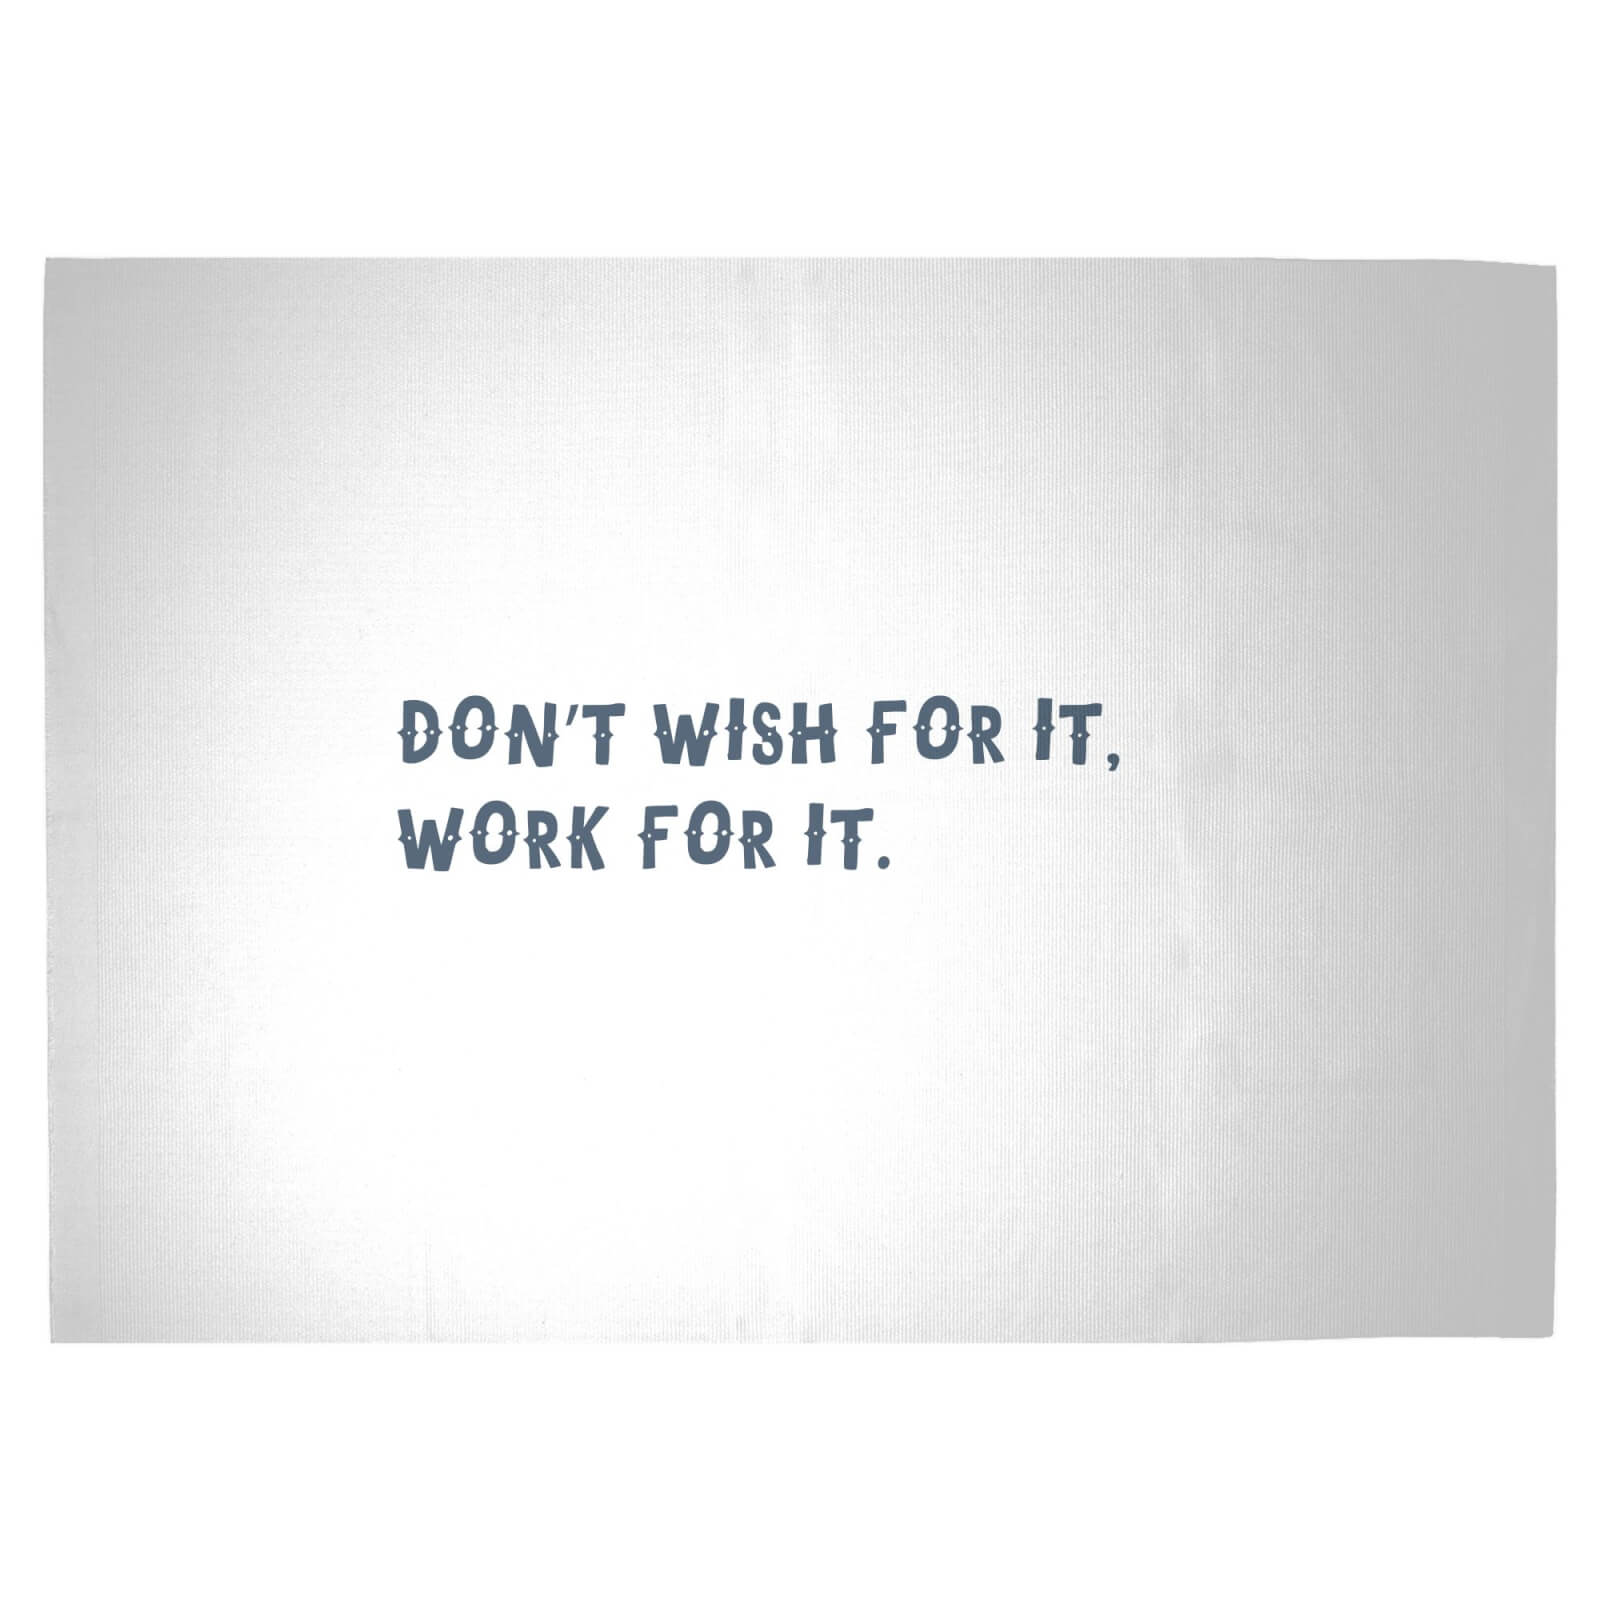 Don't Wish For It, Work For It. Woven Rug - Large